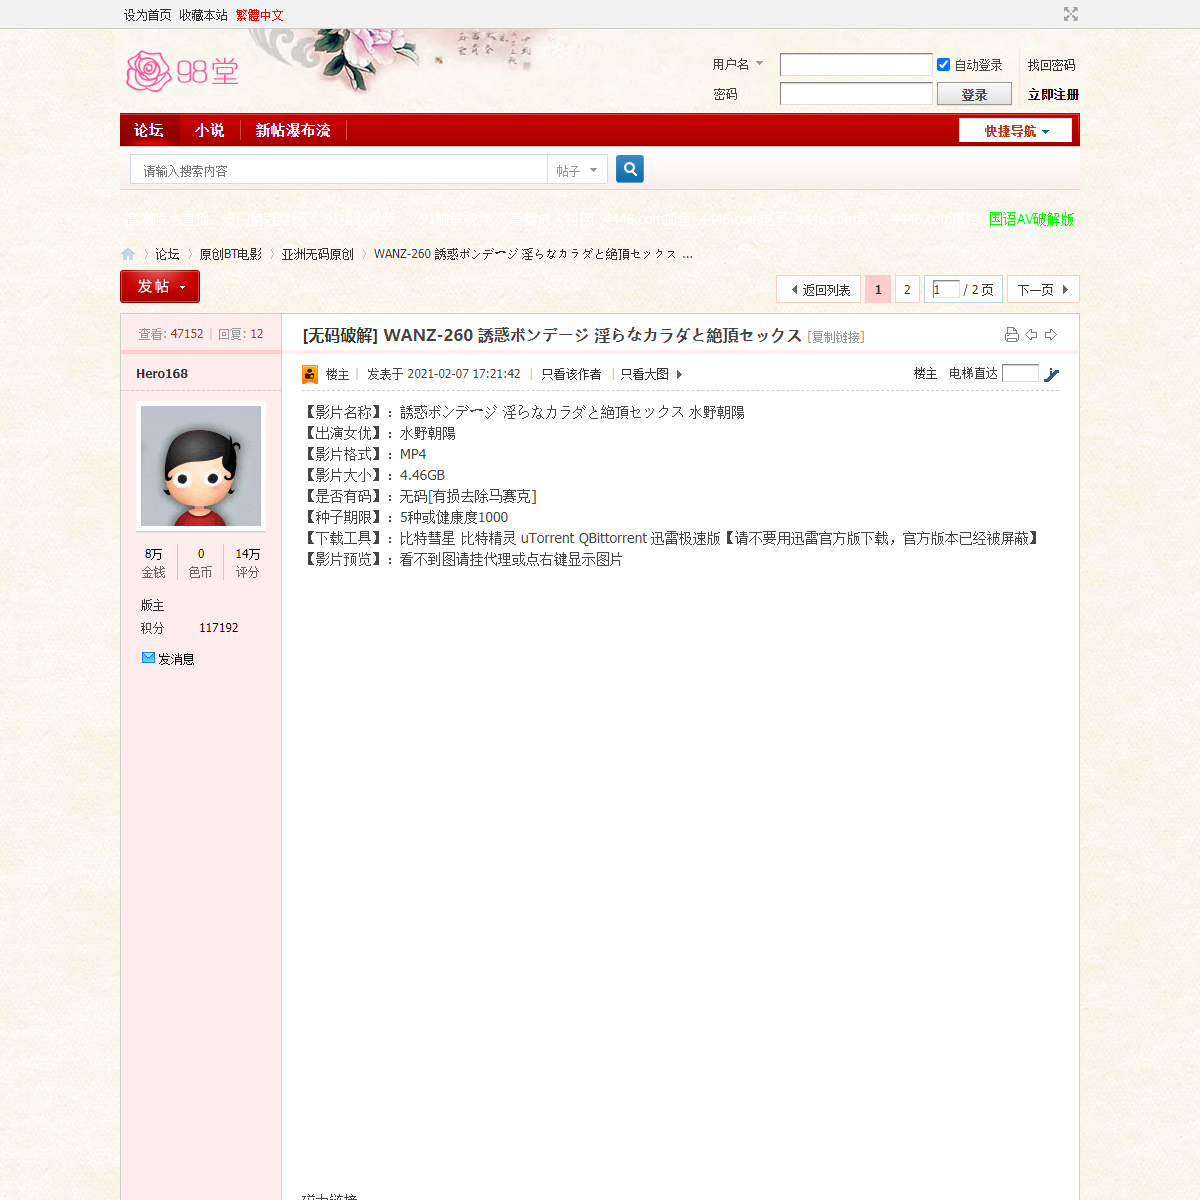 A complete backup of https://www.sehuatang.net/thread-477172-1-1.html